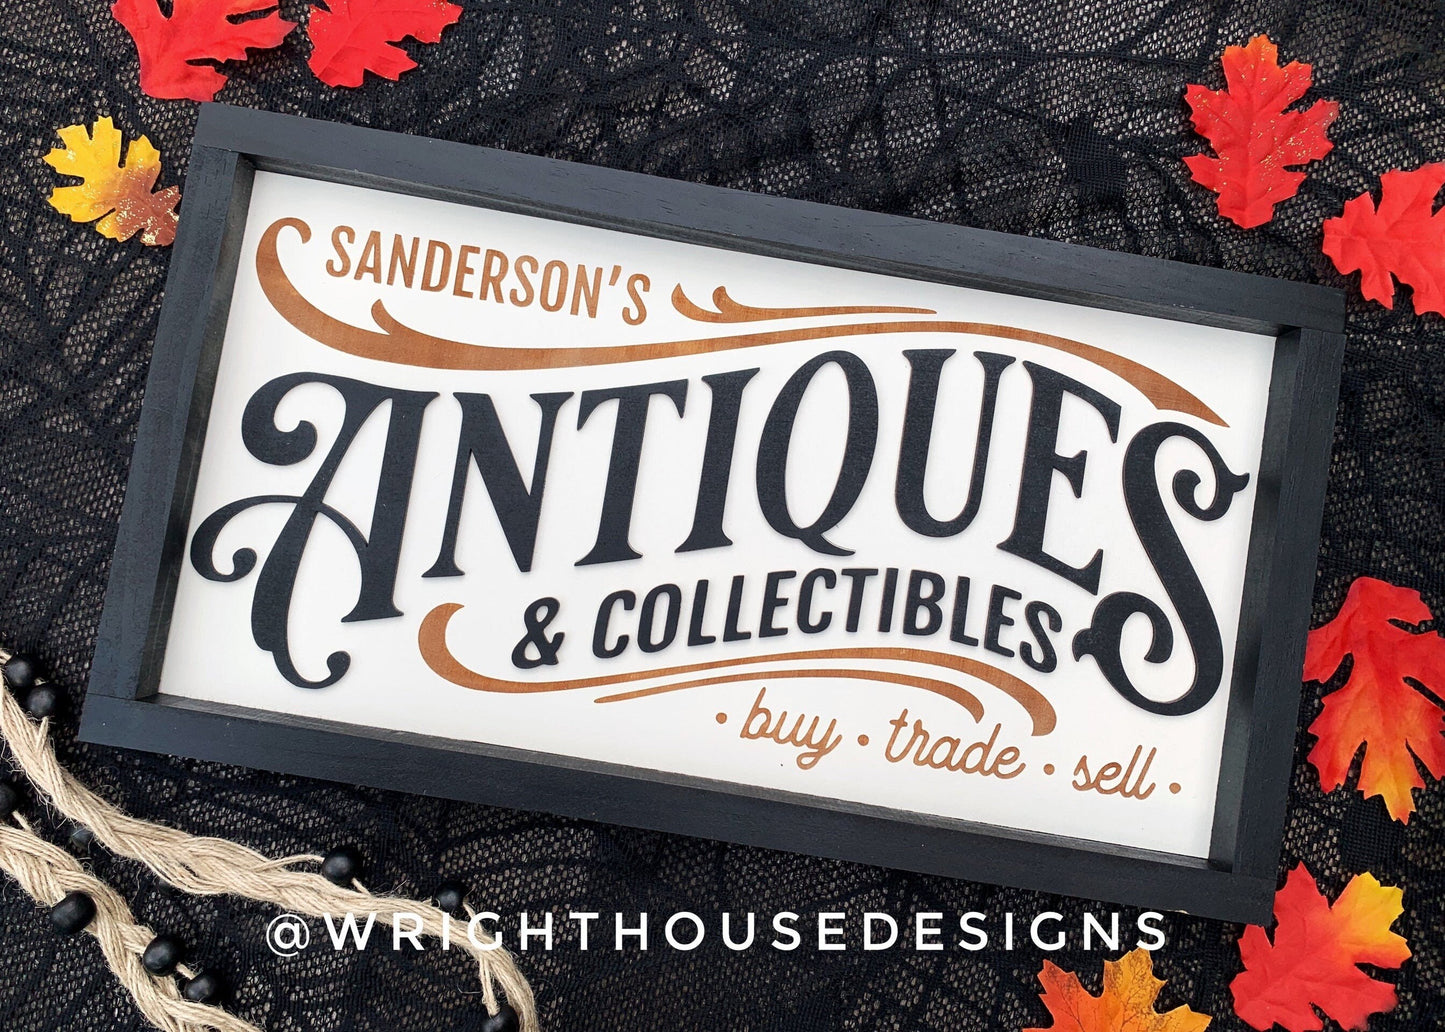 Sanderson’s Antiques - Halloween Witchy Wall Sign - Wooden Coffee Bar Sign - Dark Academia - Cottagcore Witch Home Decor - Gothic Wall Art